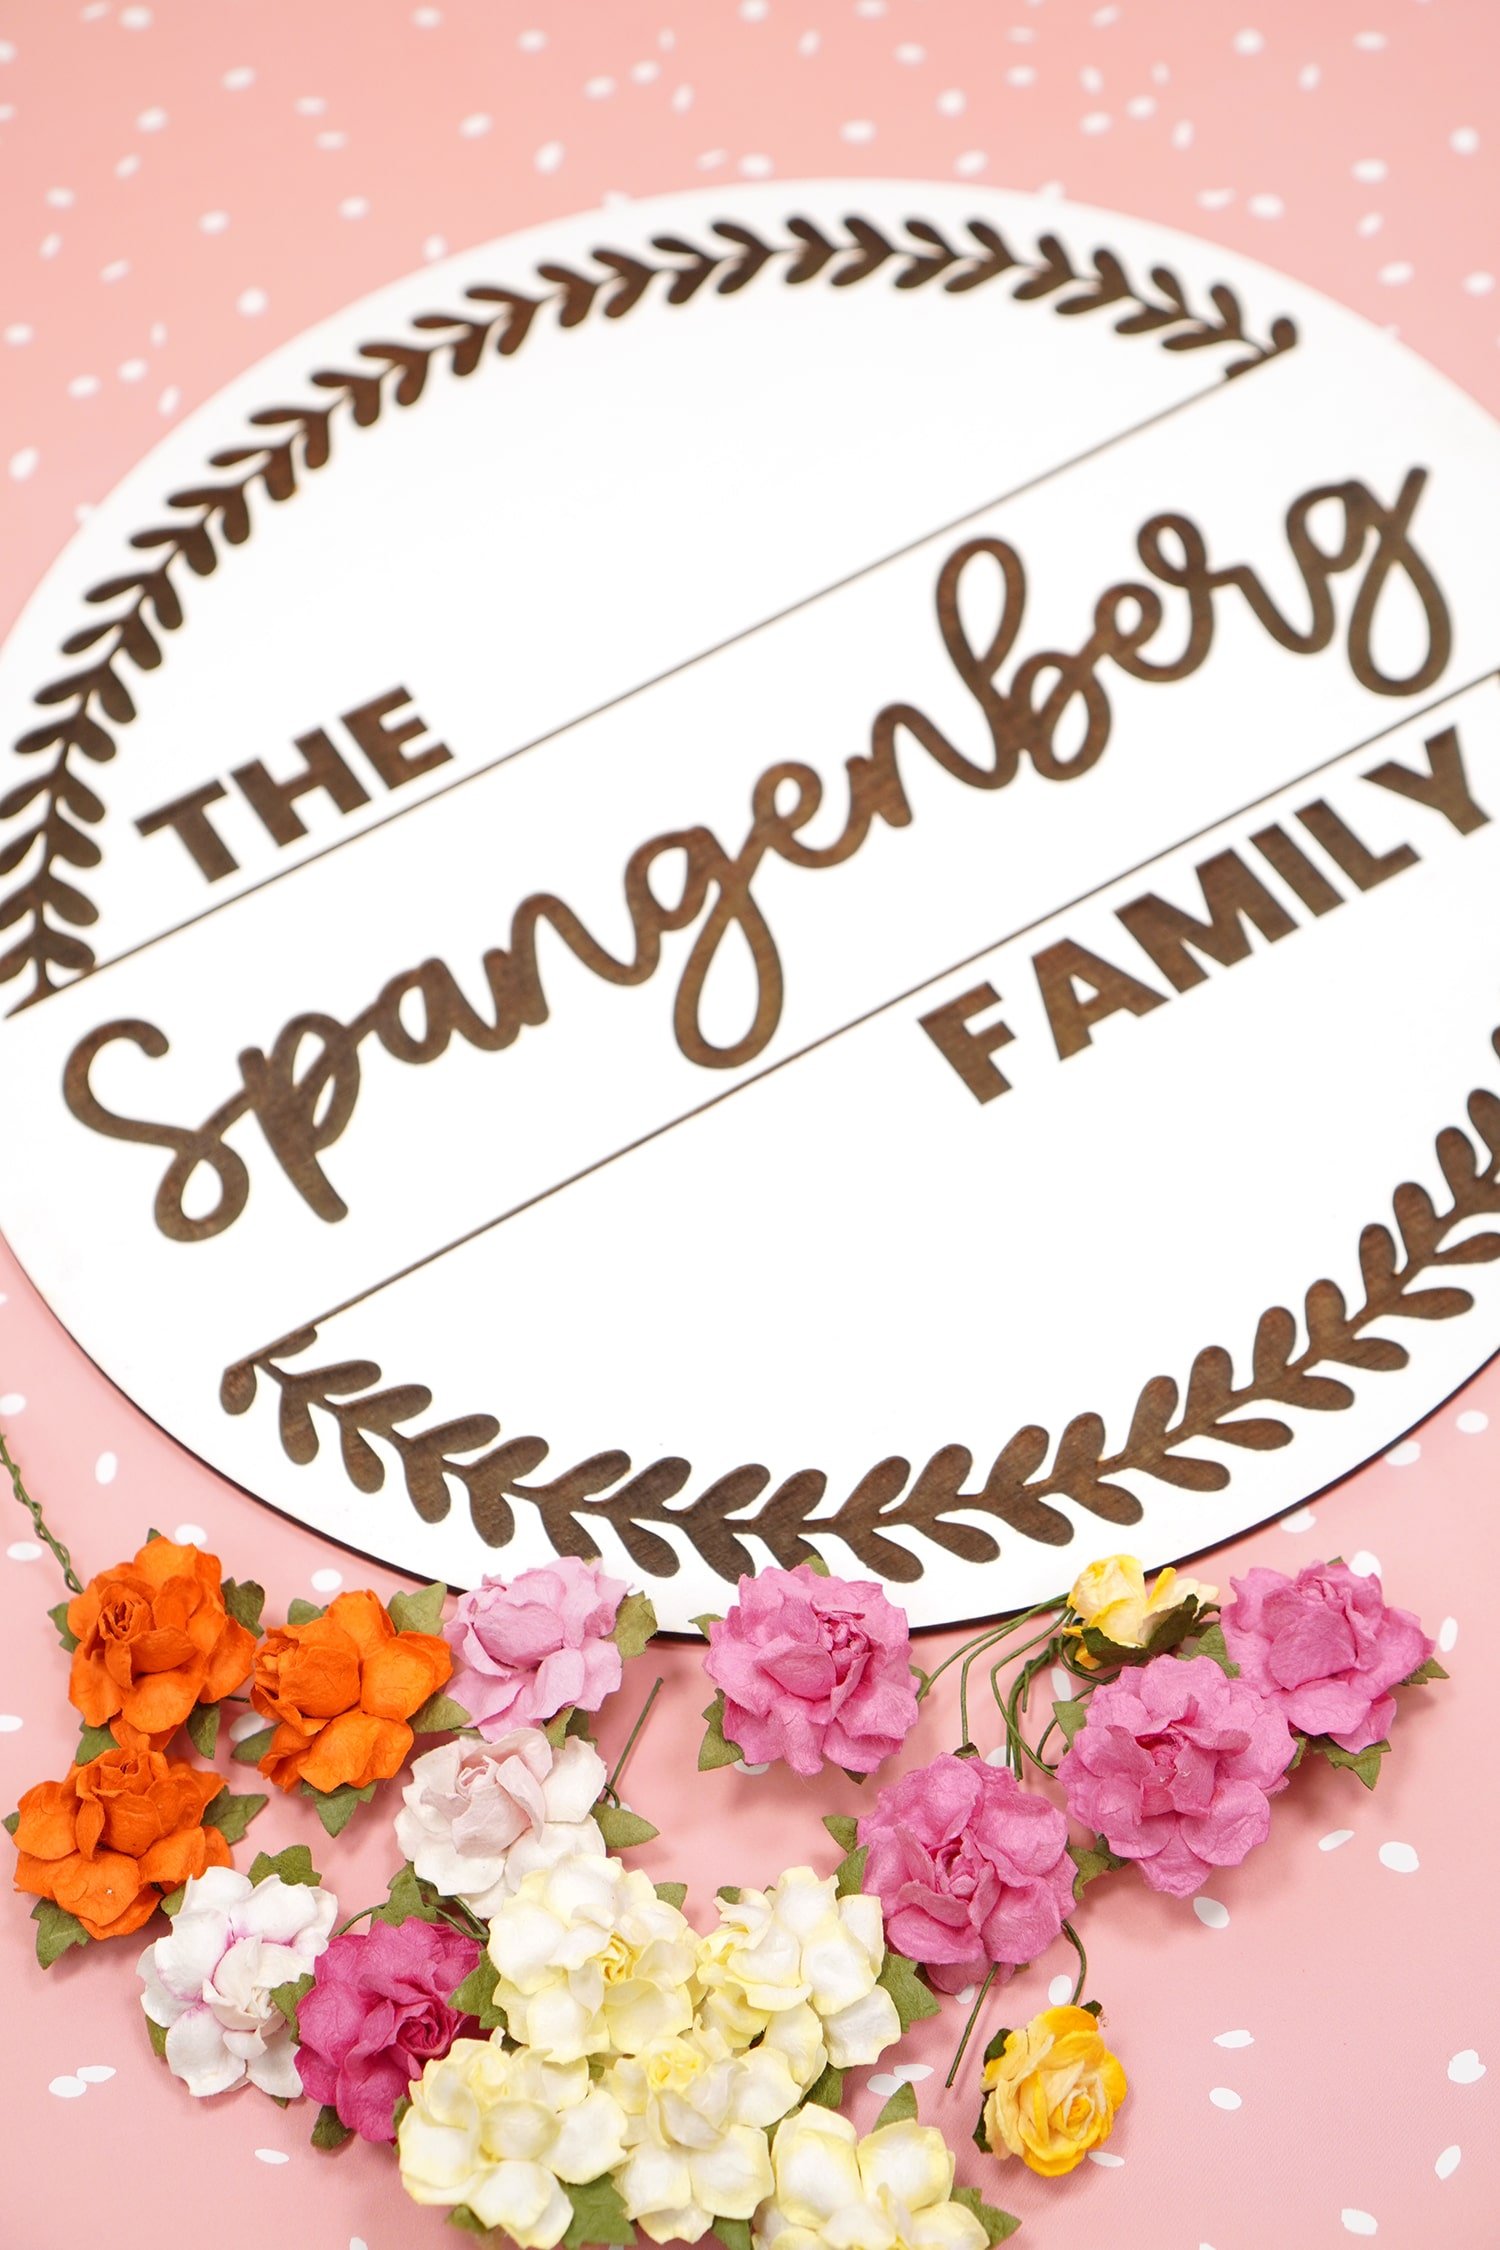 "The Spangenberg Family" white Glowforge engraved round wood sign with flowers on pink dotted background